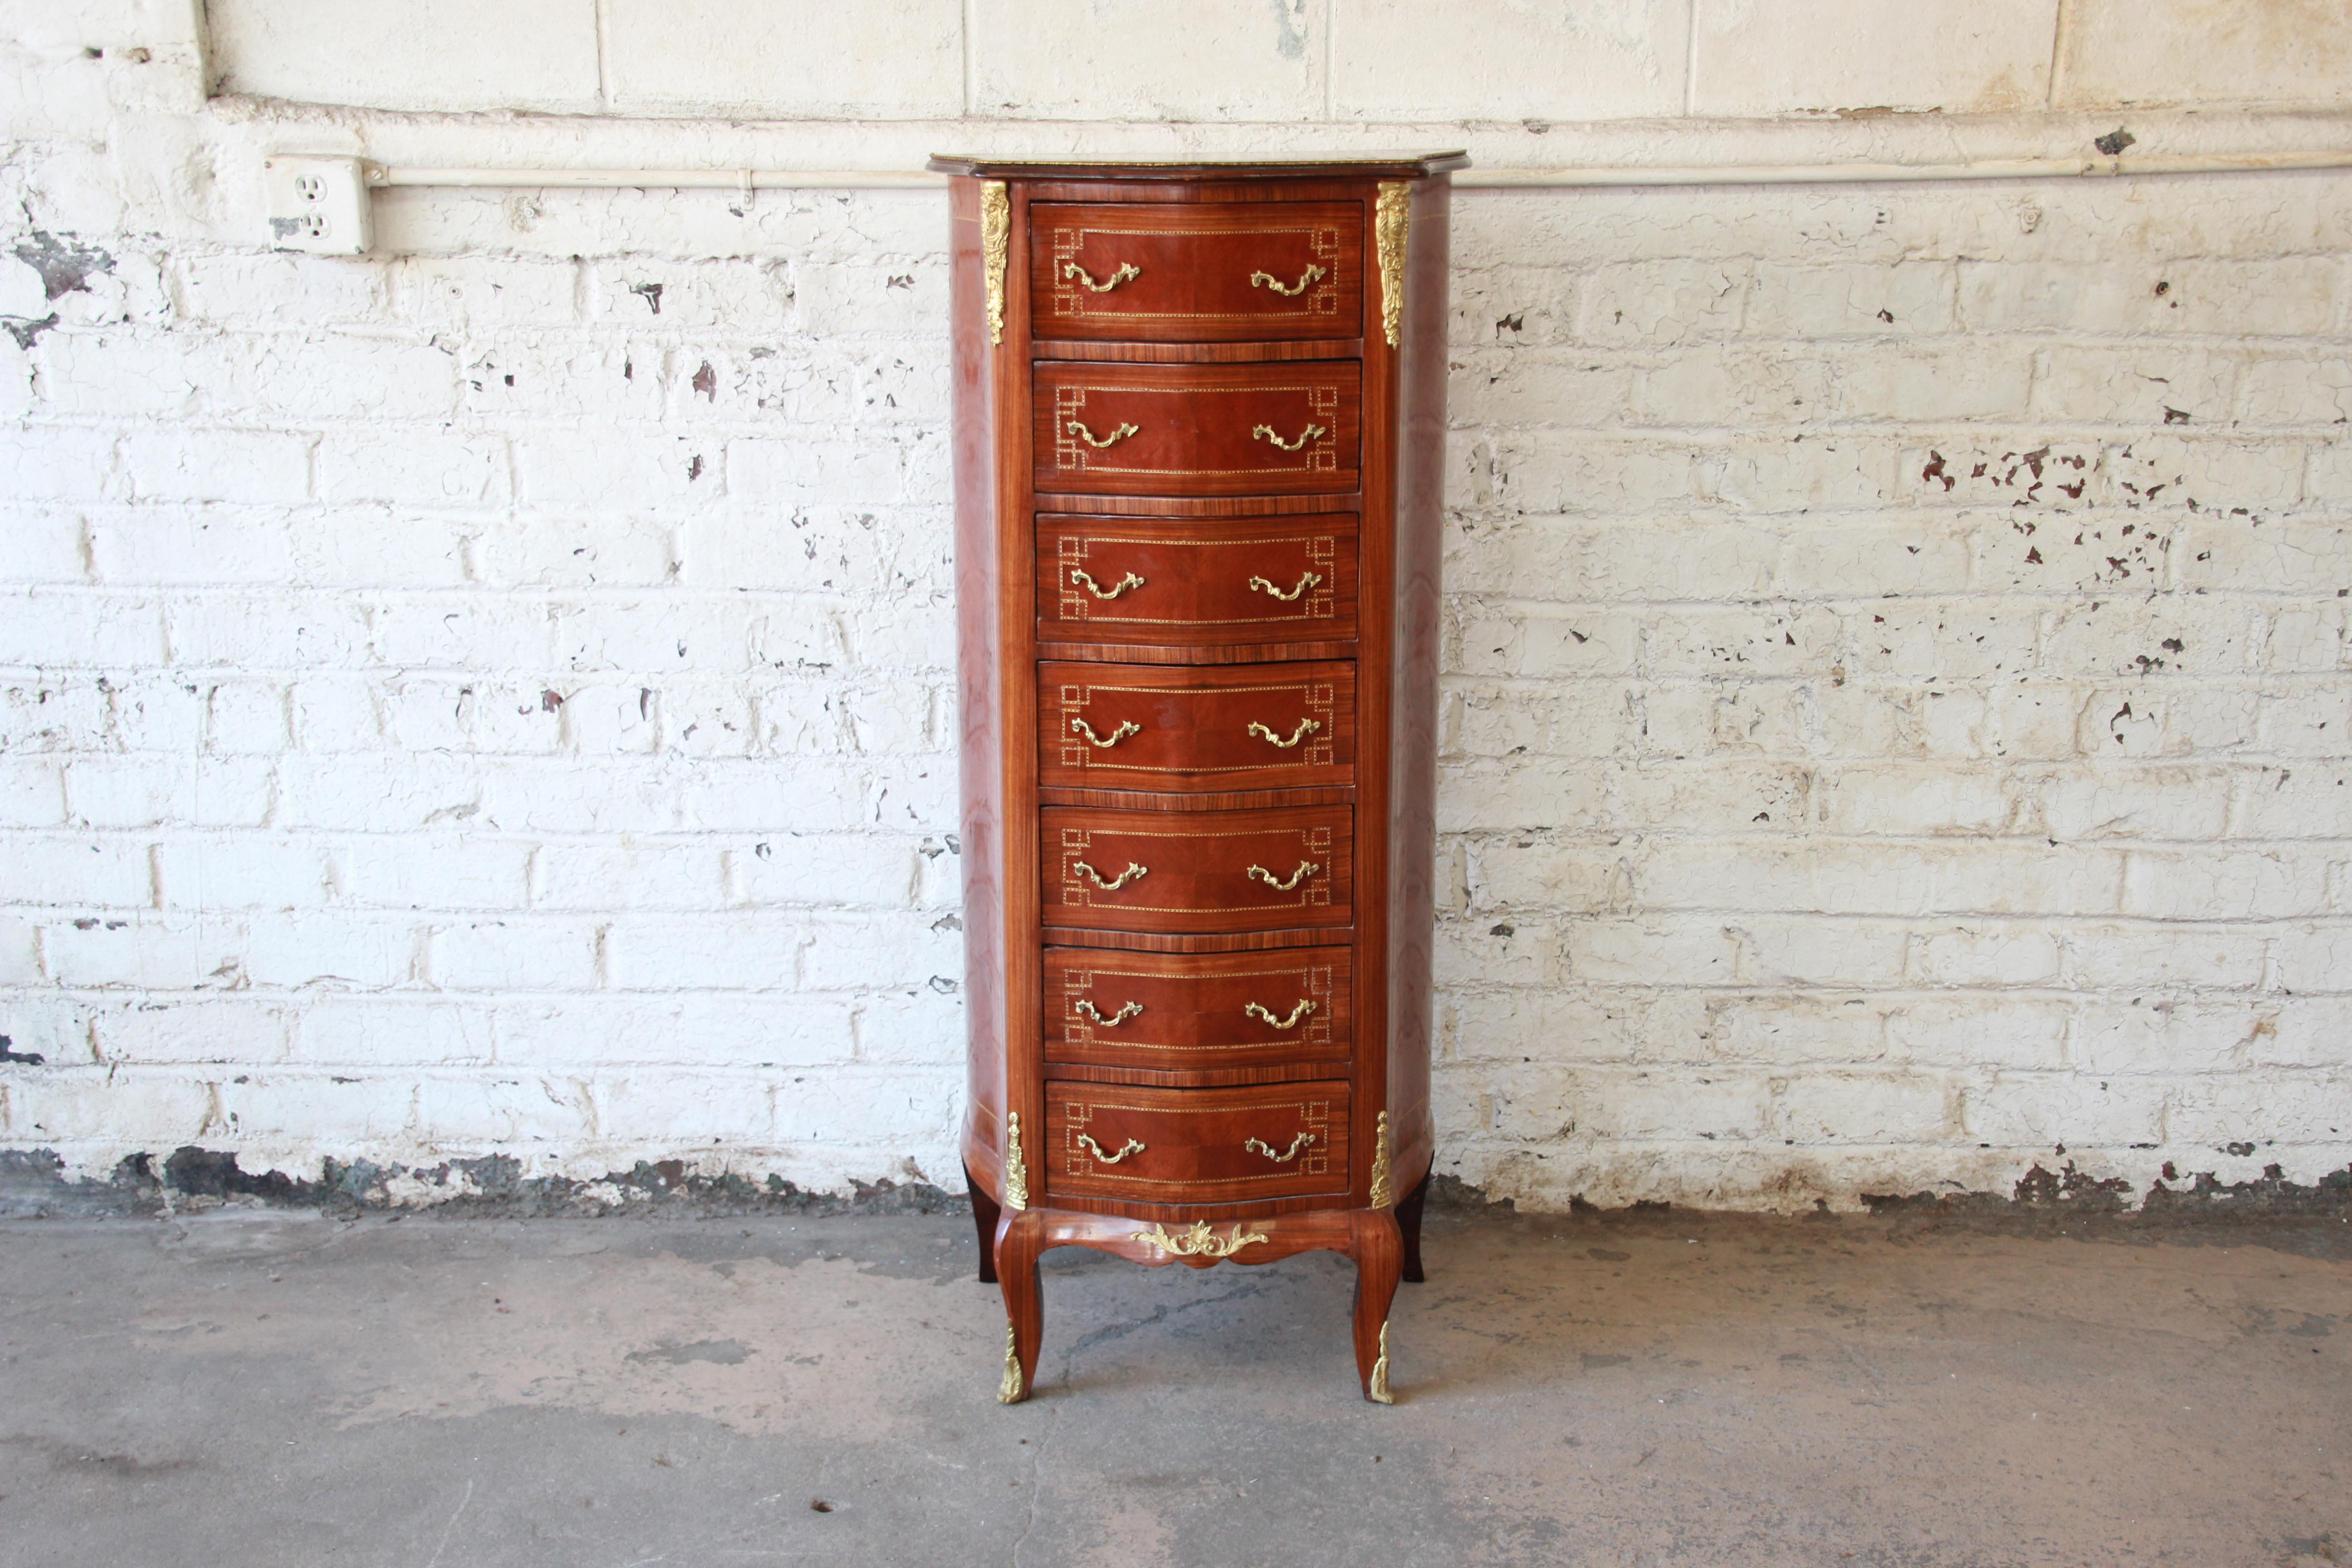 Offering a very beautiful inlaid mahogany French lingerie chest. Often referred to as a 